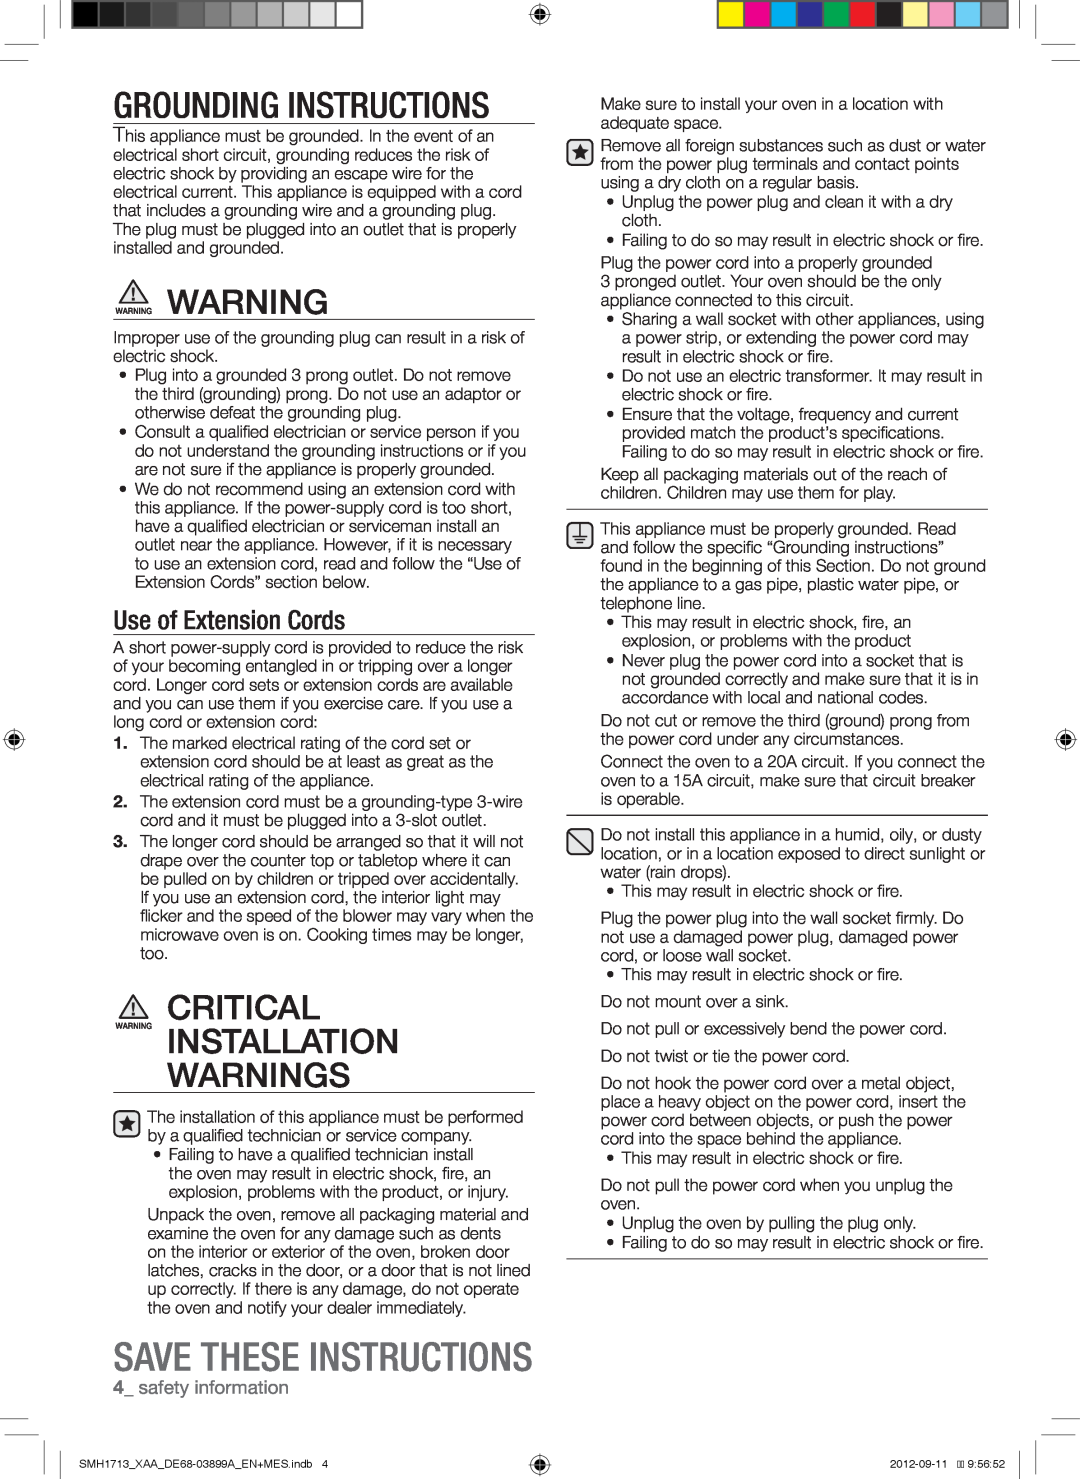 Samsung SMH1713 Grounding Instructions, Critical Warning Installation Warnings, Use of Extension Cords, safety information 